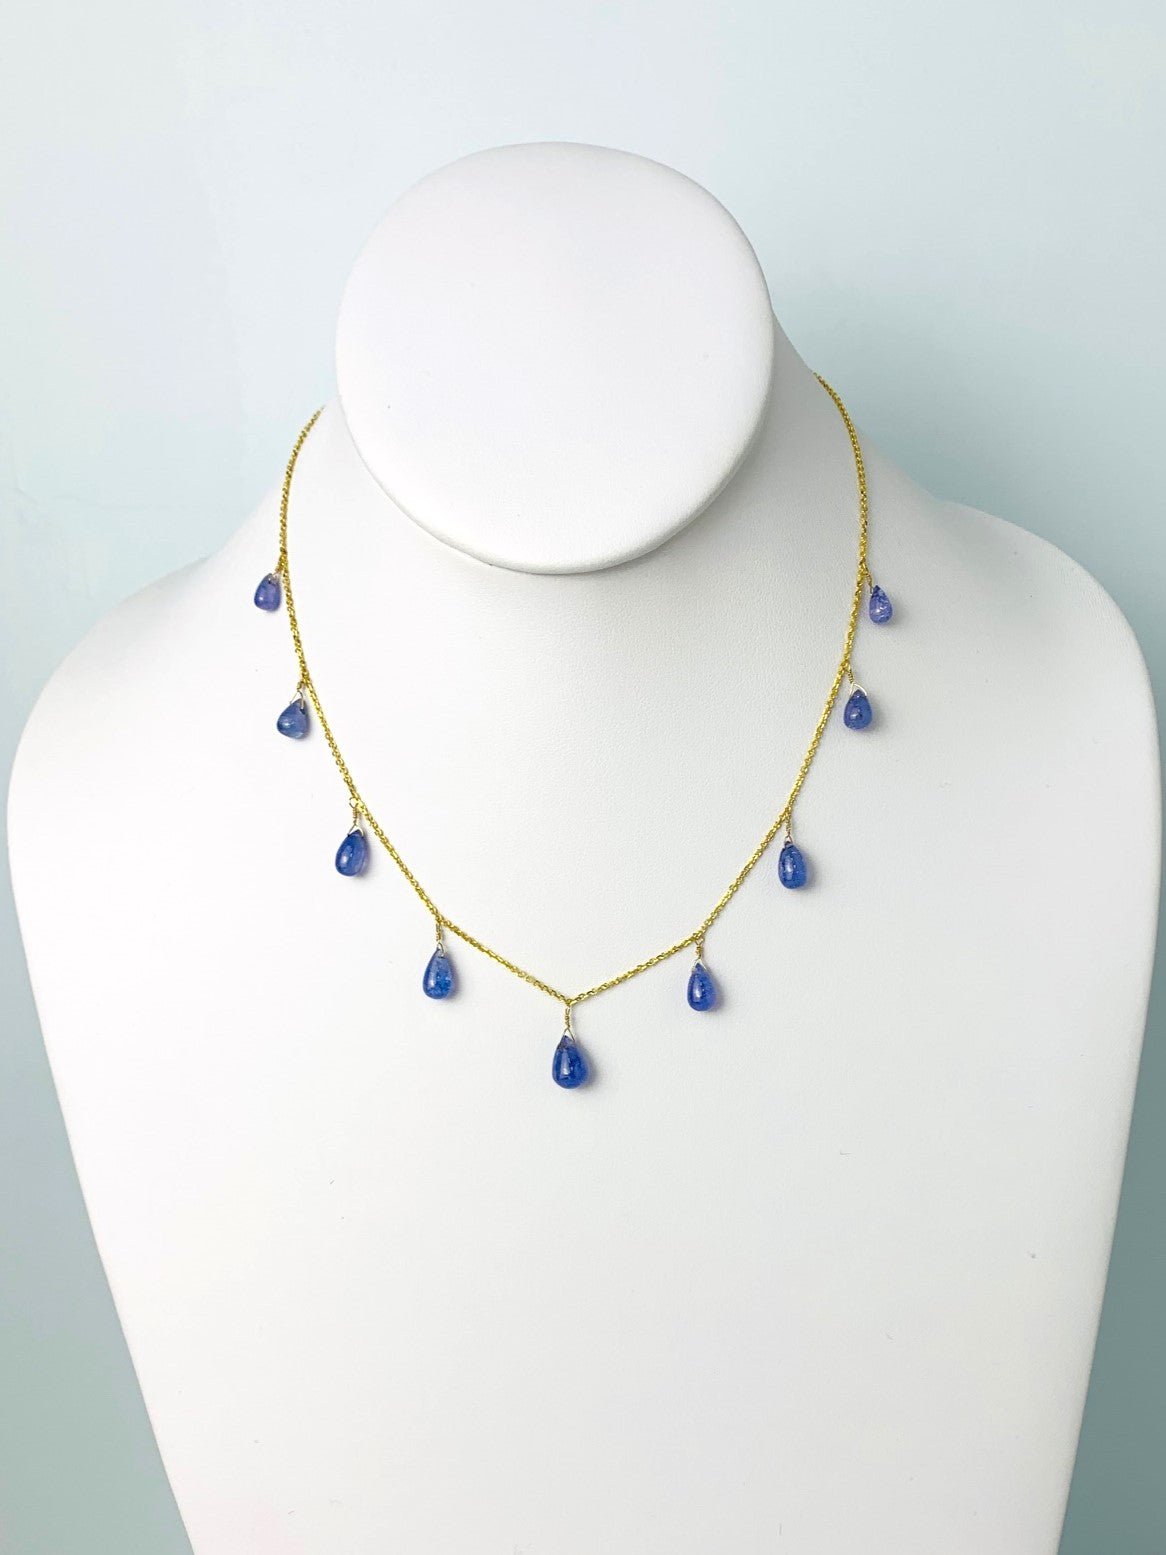 16" Tanzanite 9 Station Dangly Necklace in 18KY - NCK-586-DNGGM18Y-TANZ-16